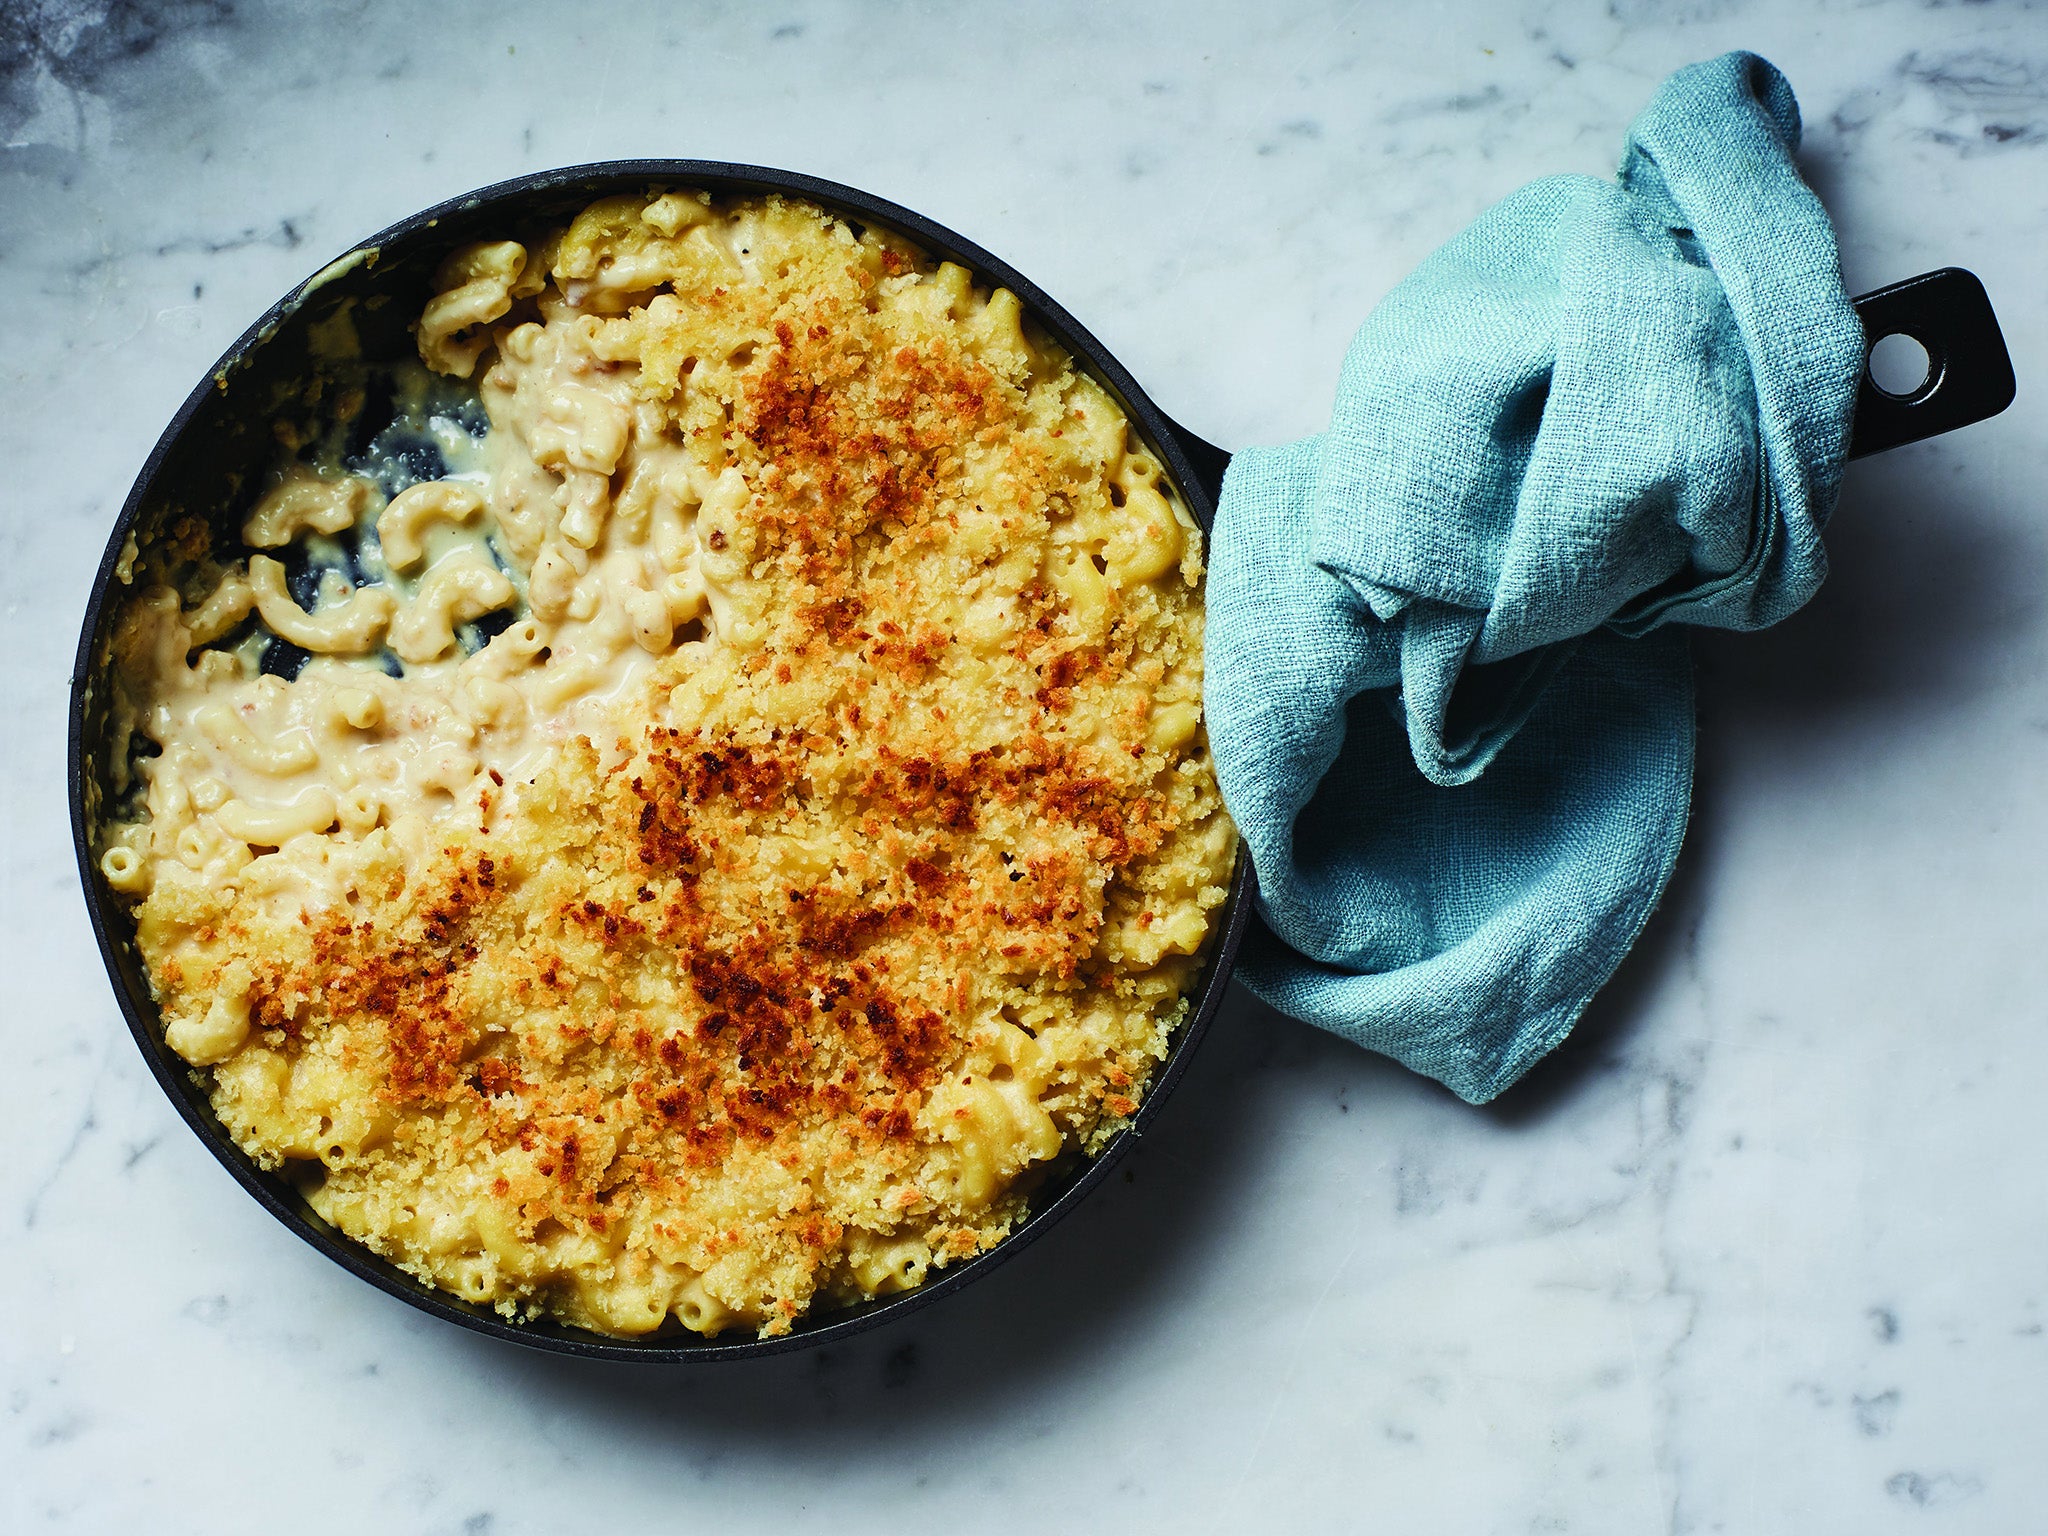 This ‘ultimate’ mac and cheese dish is creamy and delectable - without any dairy